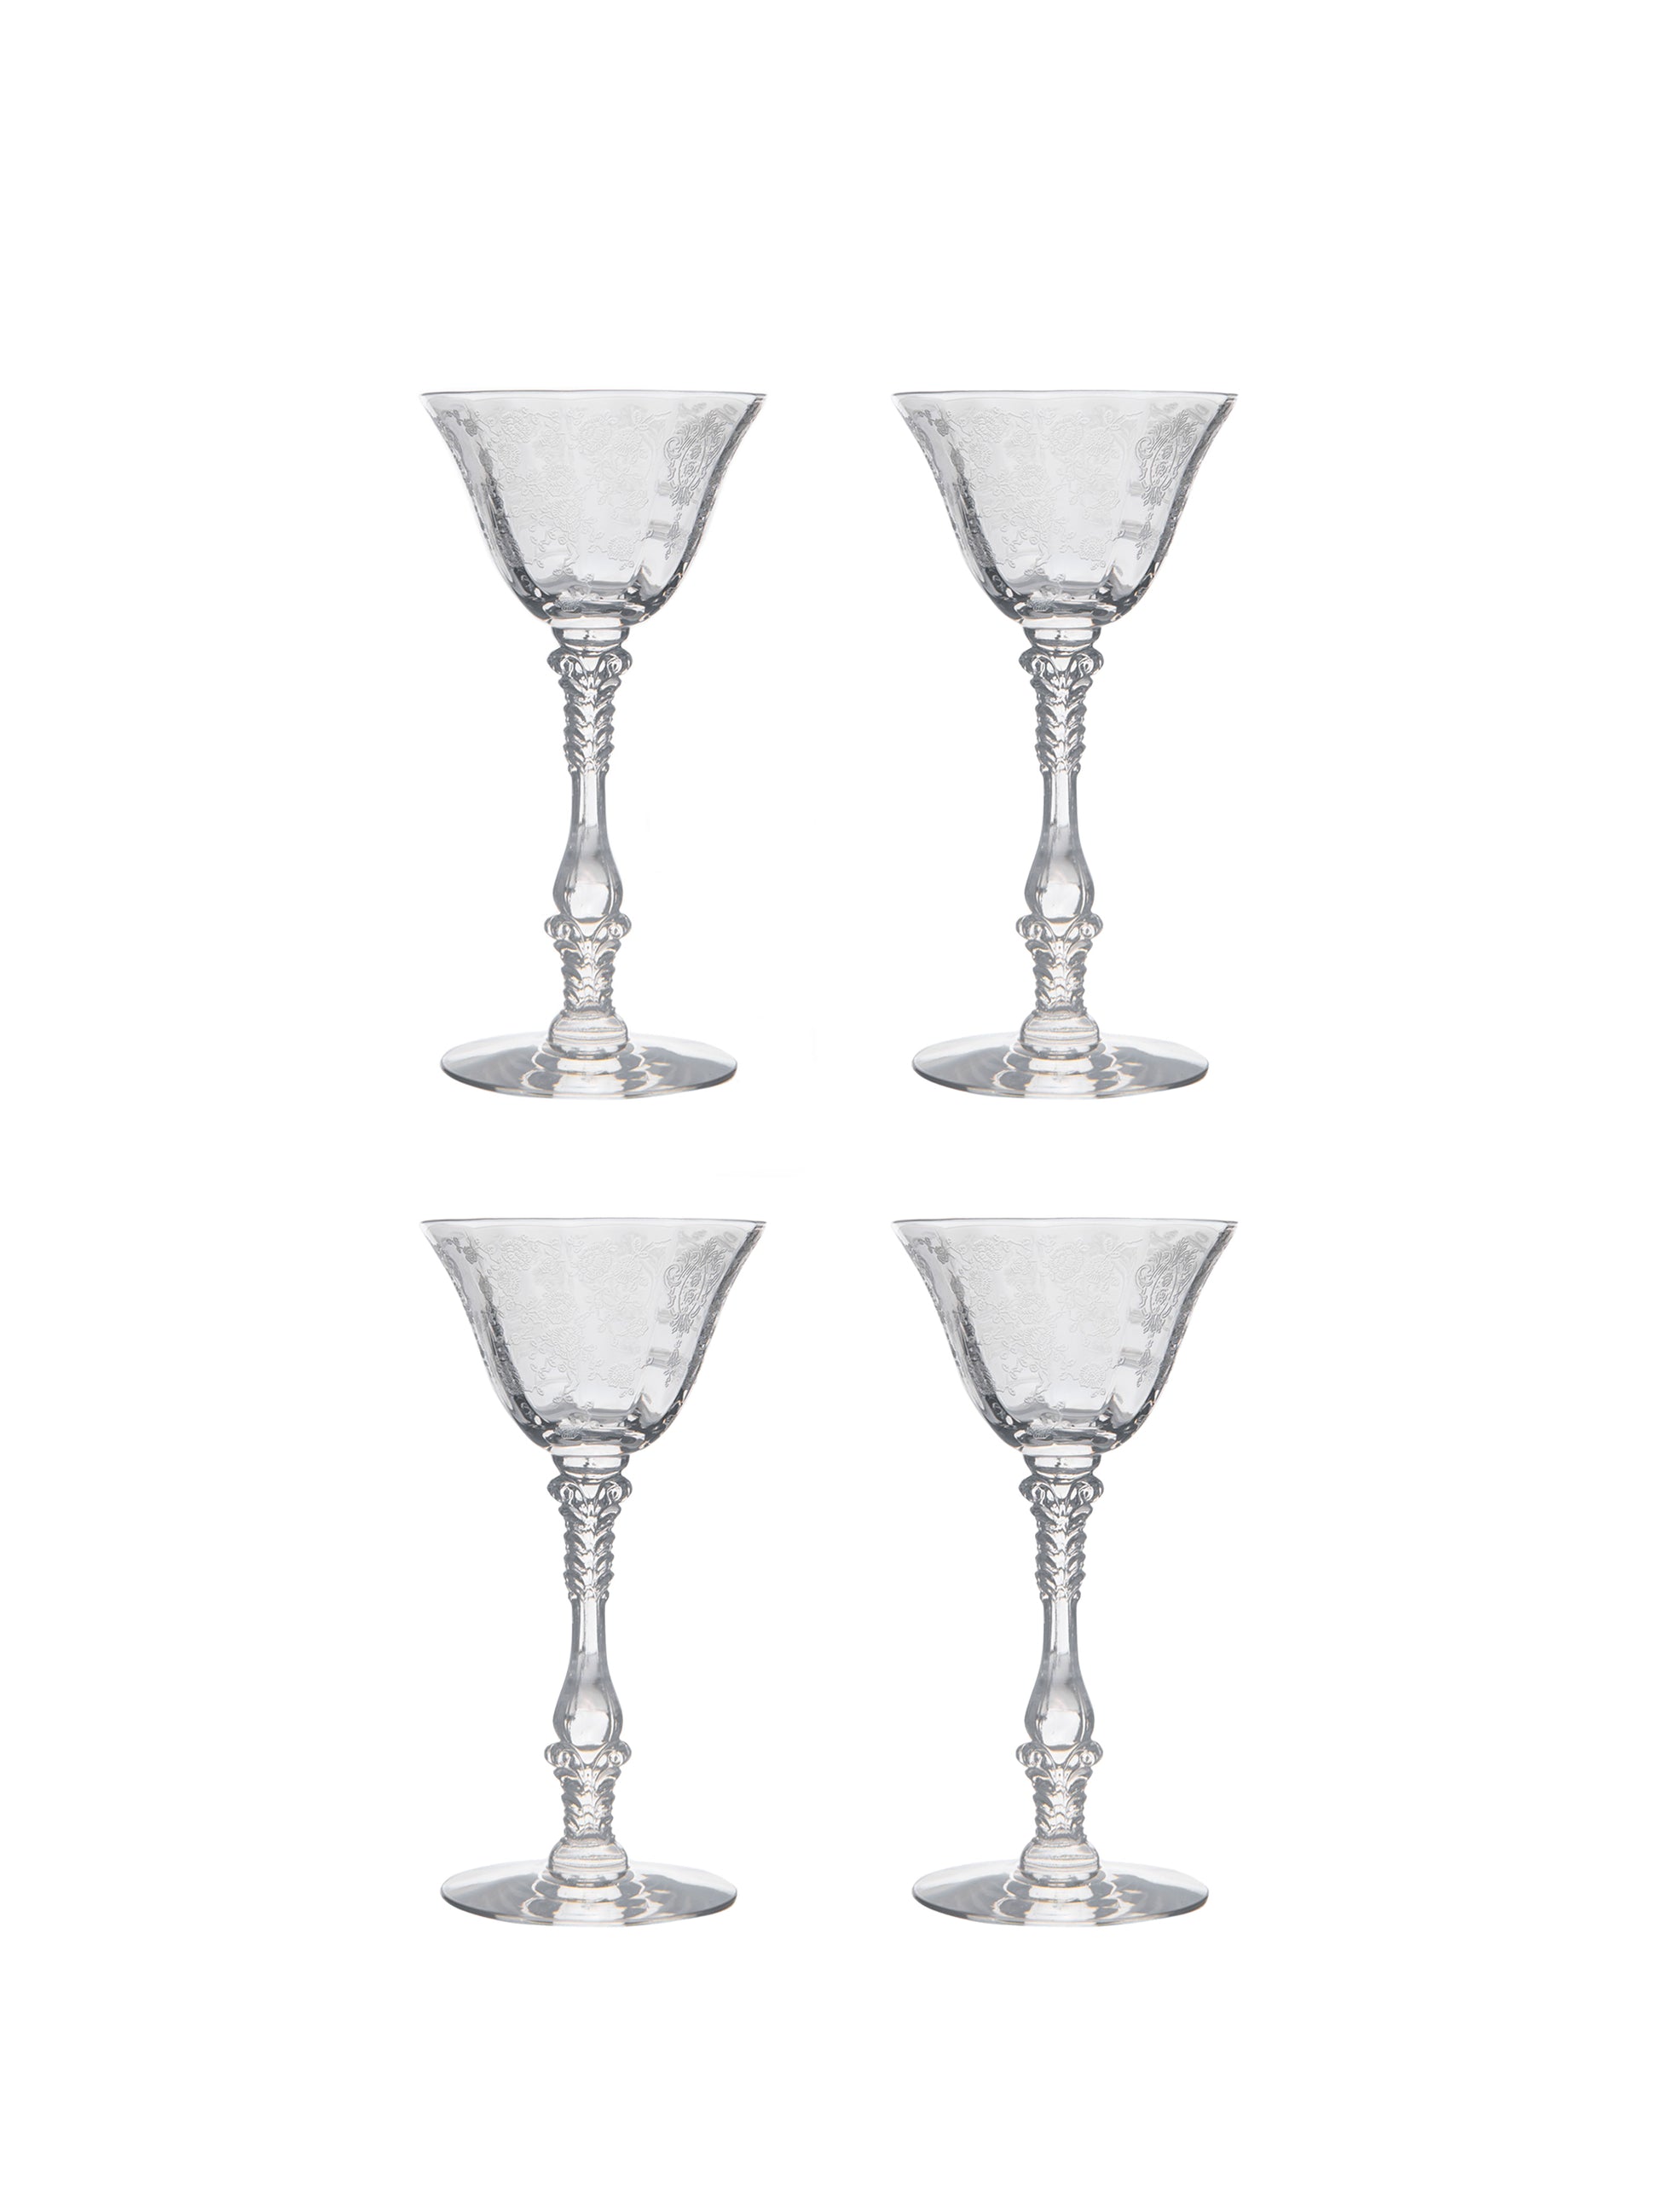 Shop the Vintage 1940s Rose Cambridge Sherry Glasses at Weston Table